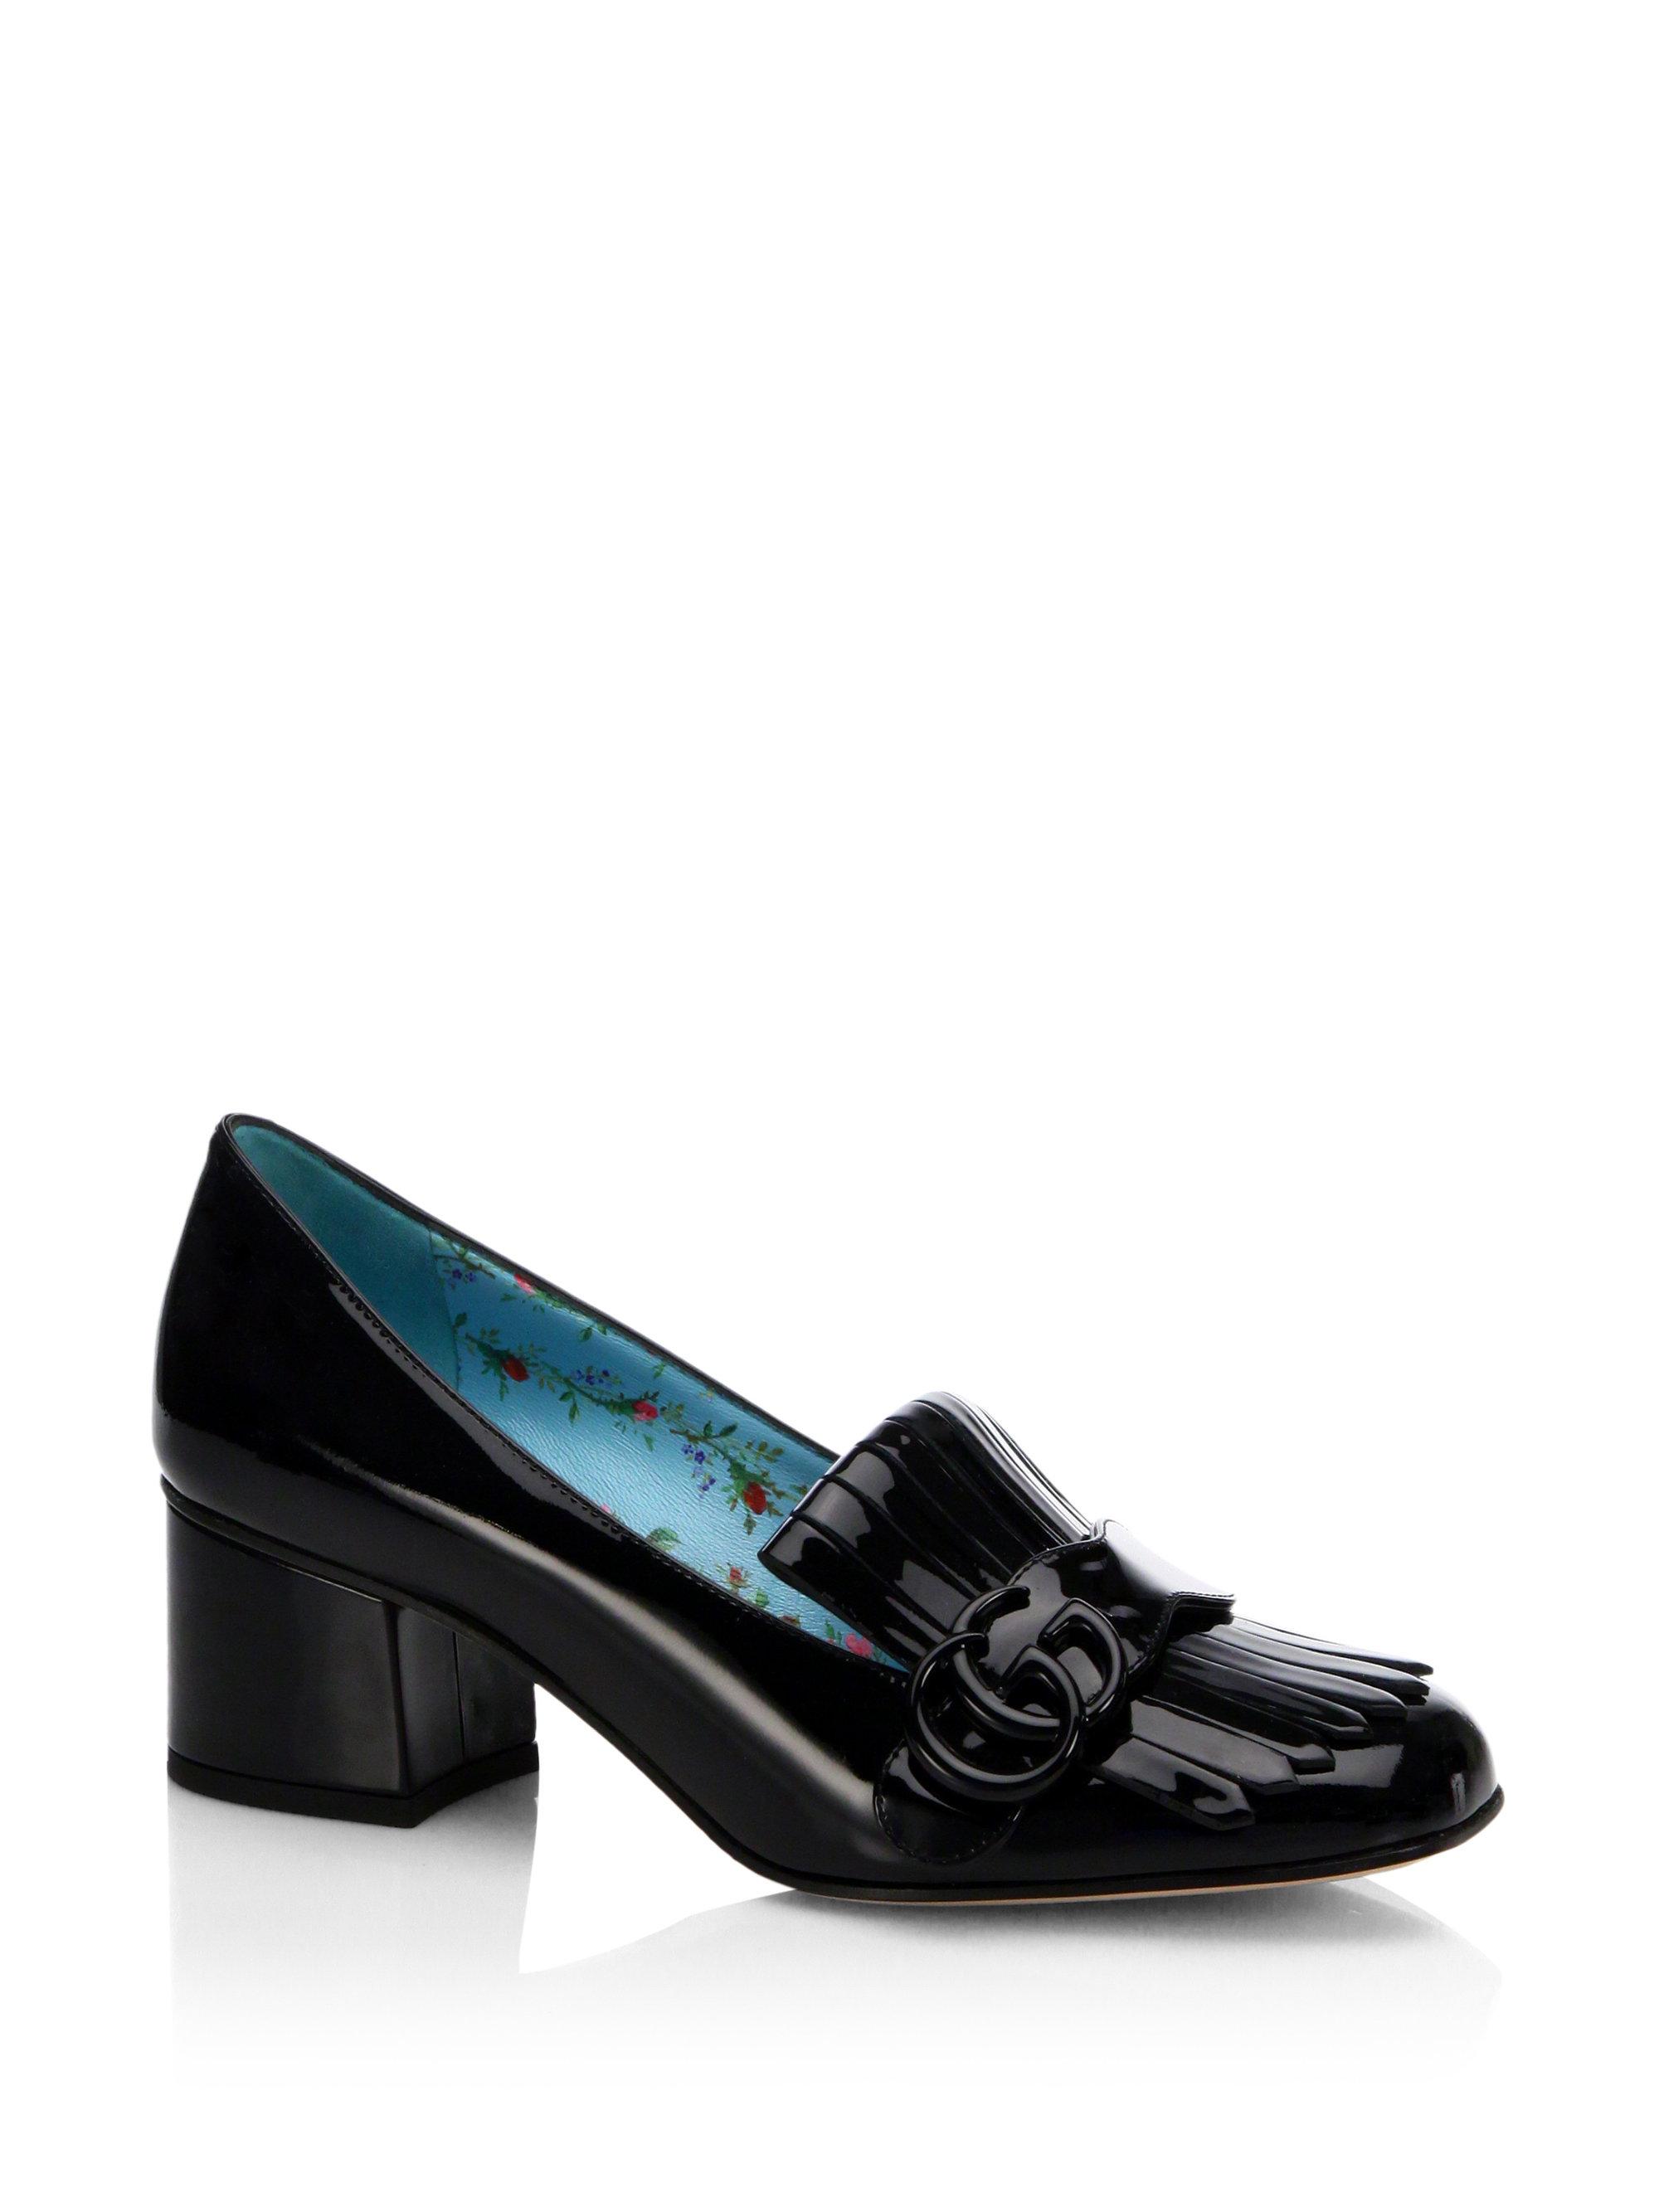 Gucci Marmont Gg Patent Leather Loafer Pumps in Black - Lyst